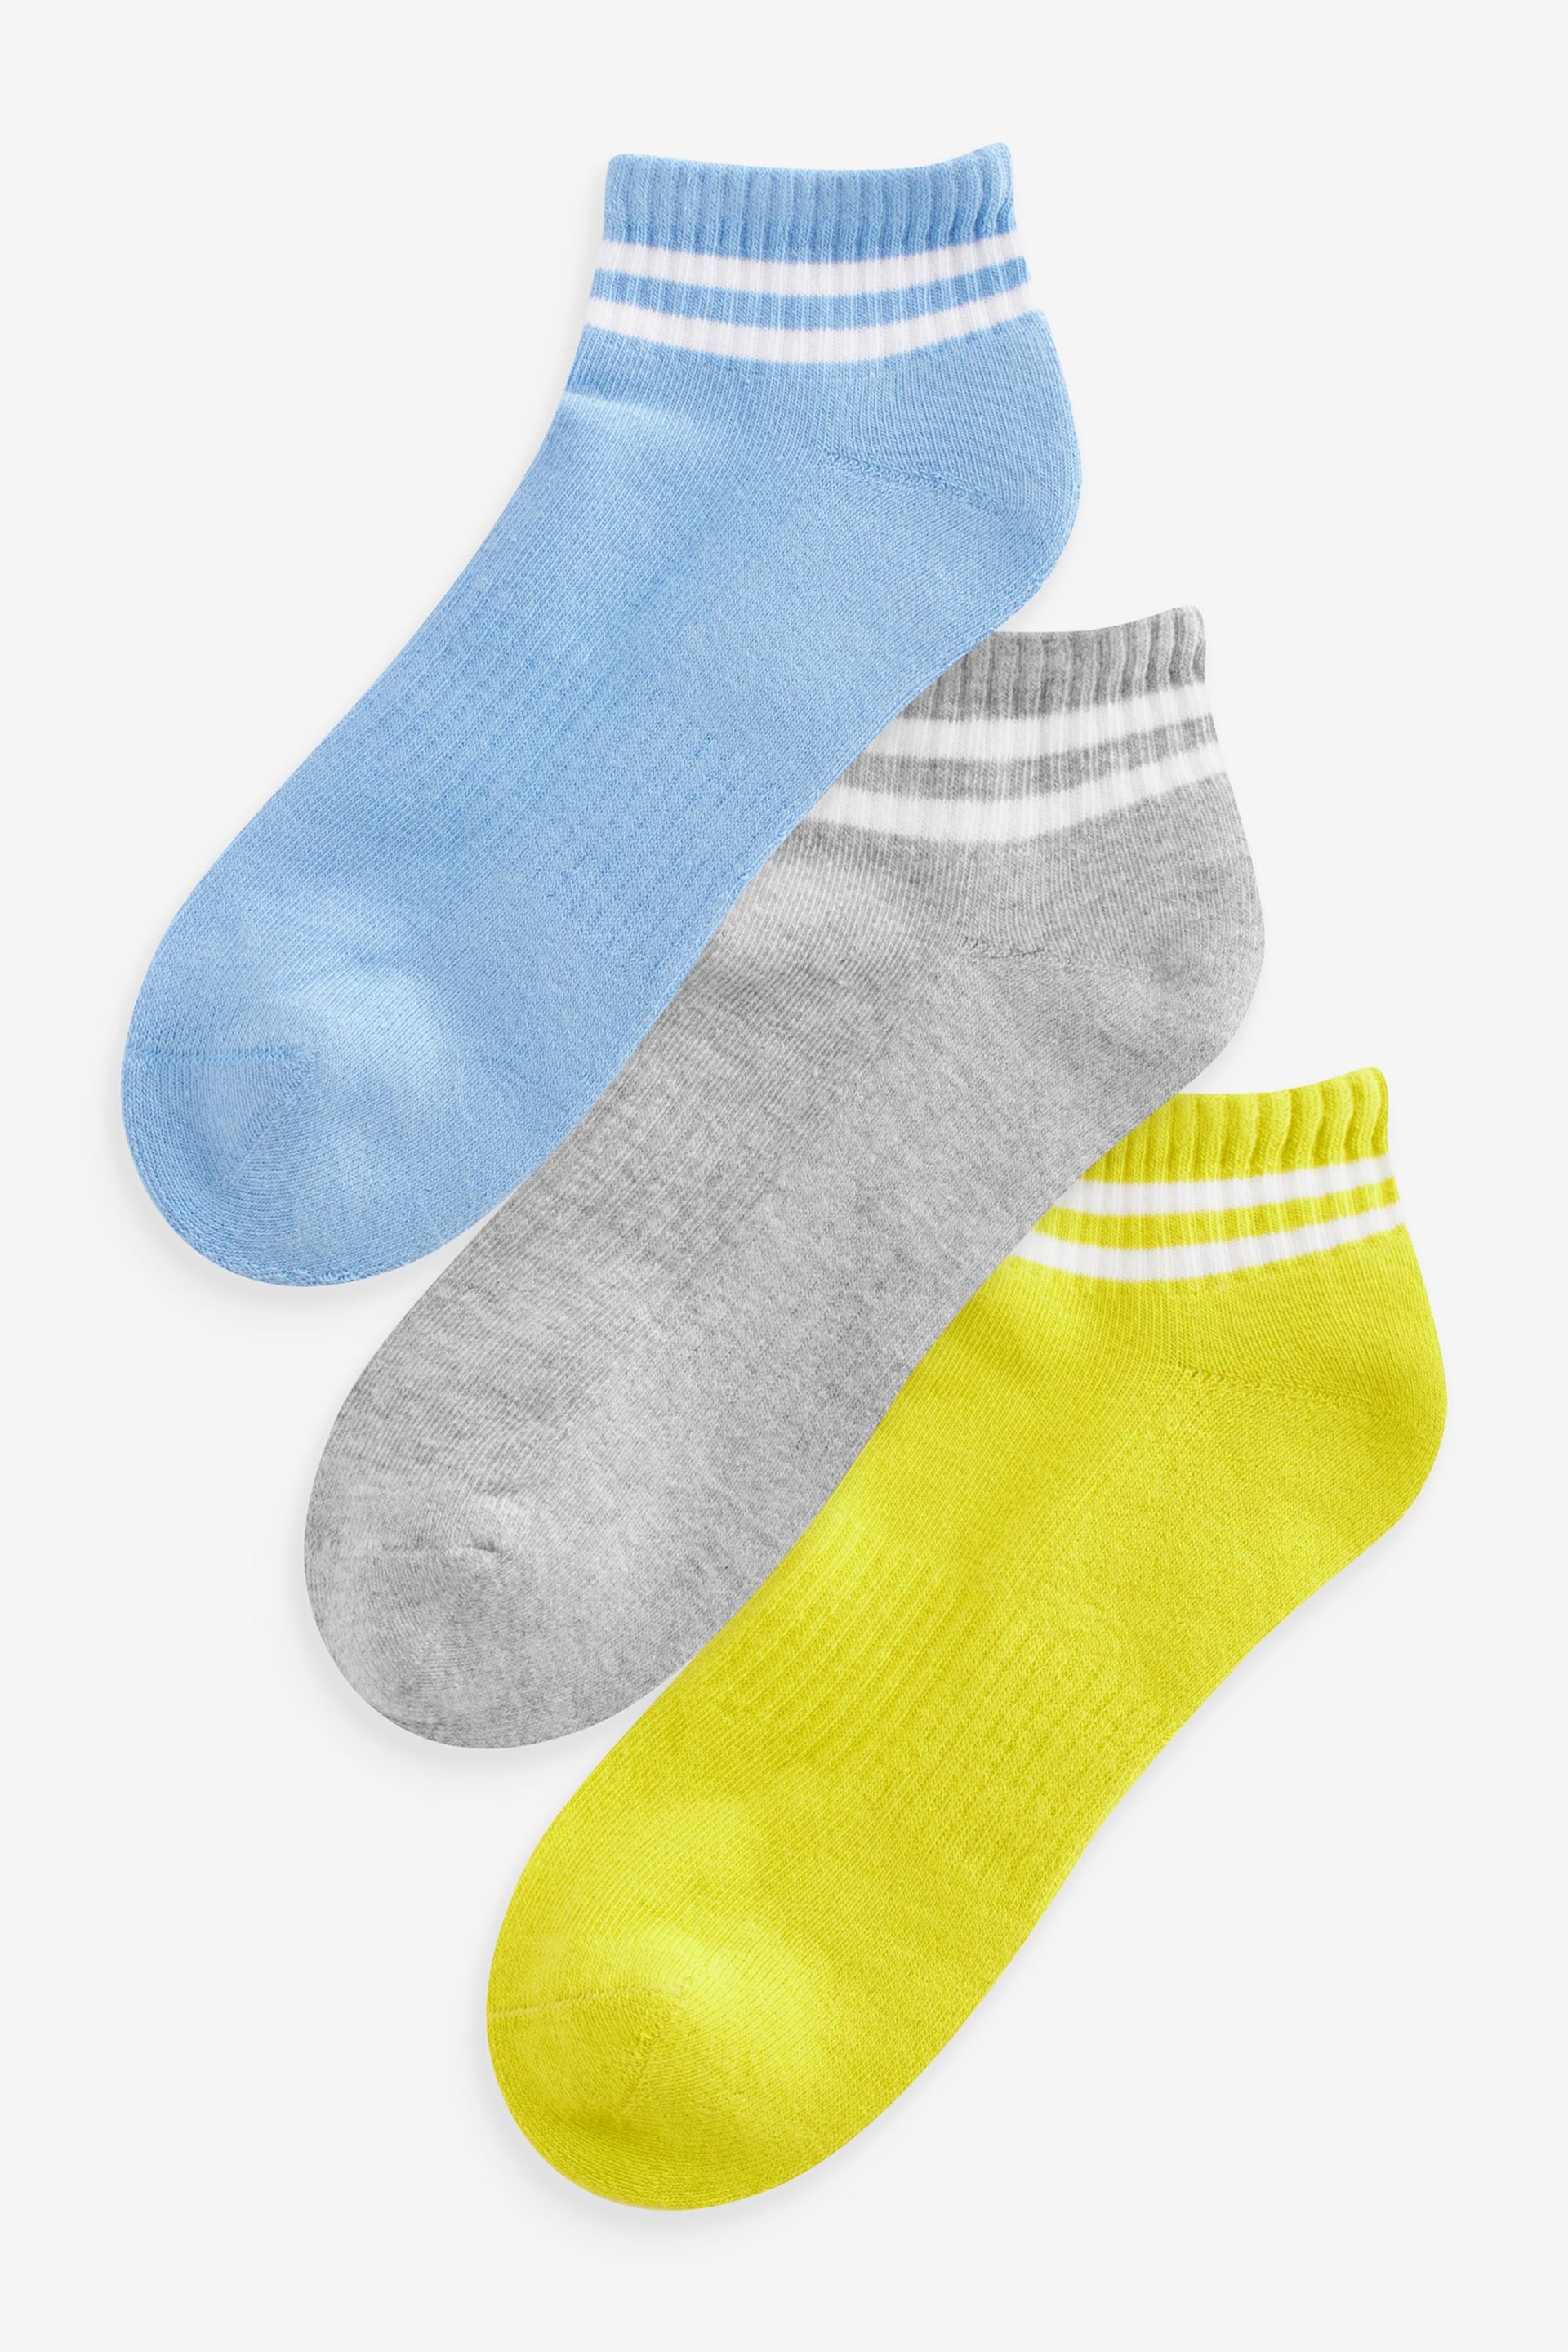 Grey/Blue/Green Stripe Cushion Sole Trainers Socks 3 Pack With Arch Support - Image 1 of 4